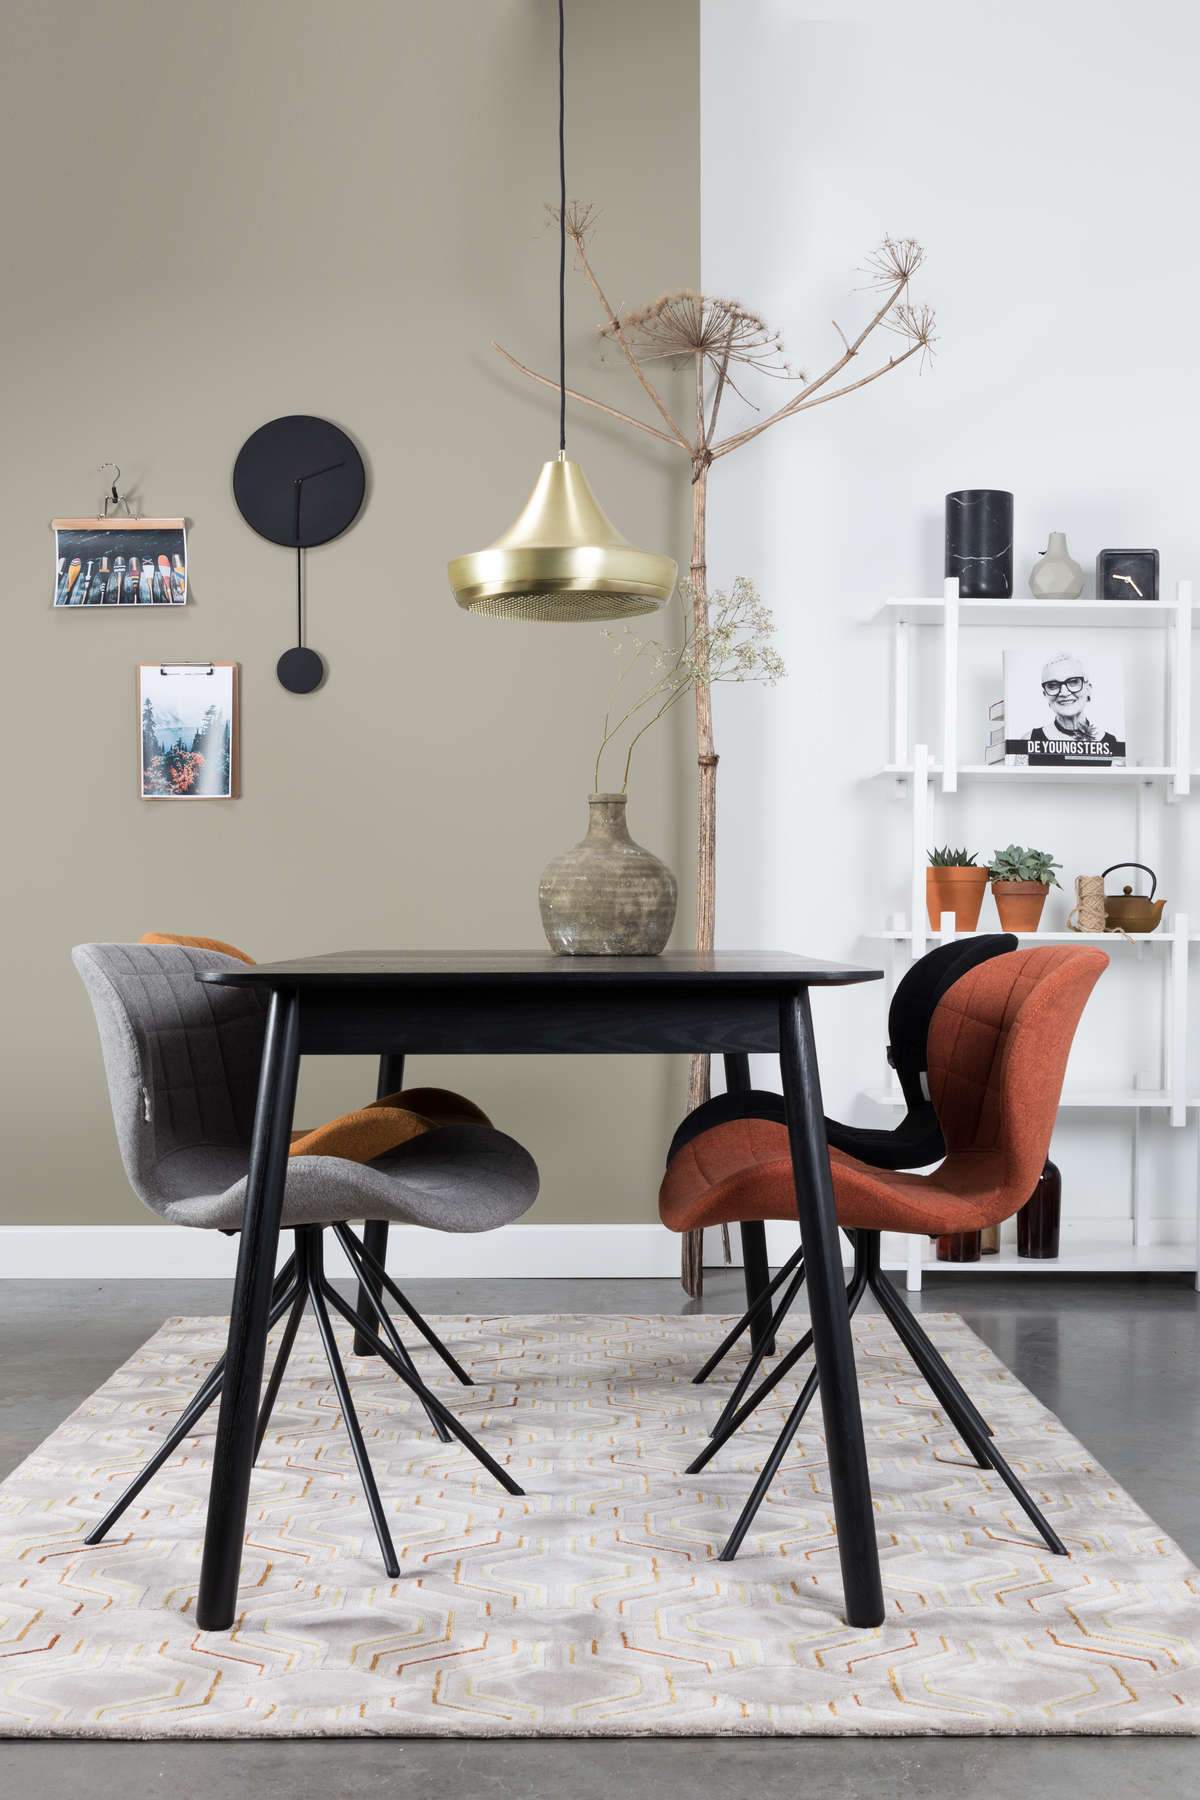 GLIMPS table 120/162 x 80 black, Zuiver, Eye on Design